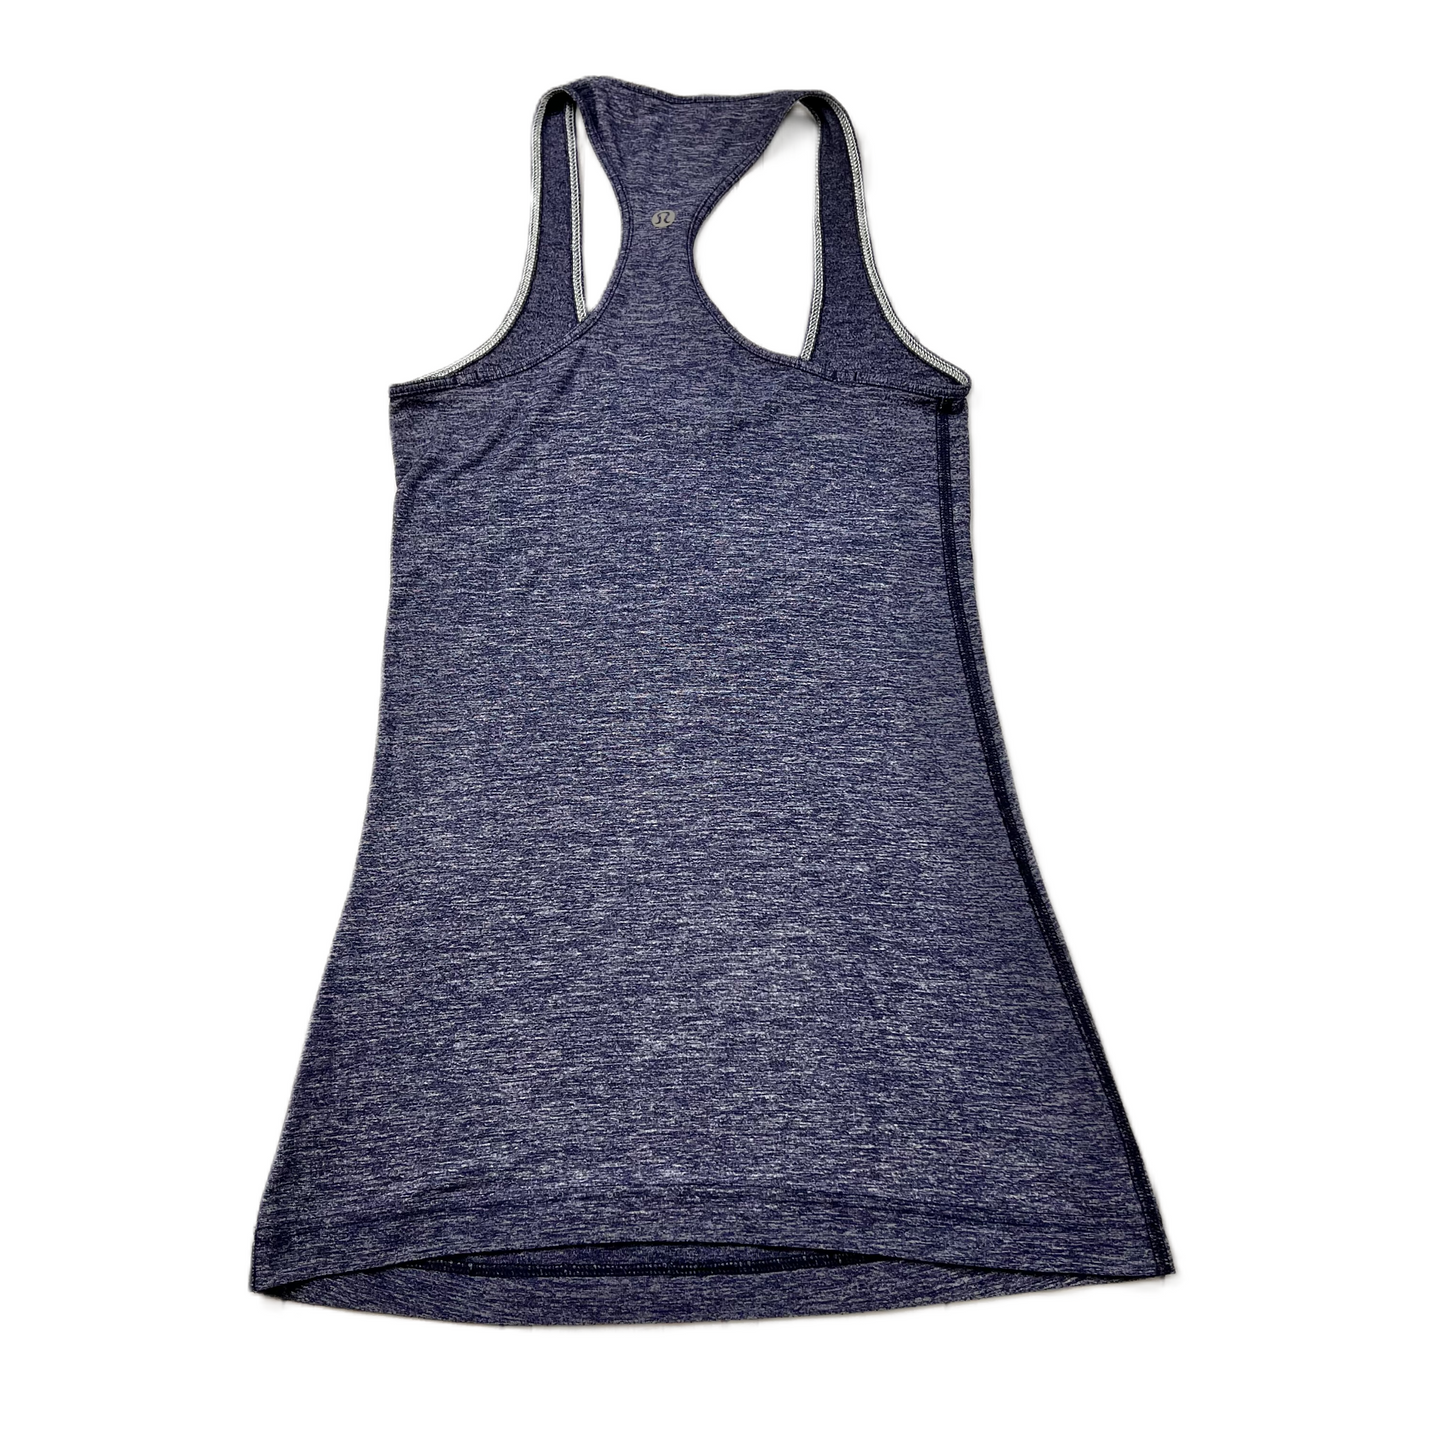 Navy Athletic Tank Top By Lululemon, Size: S